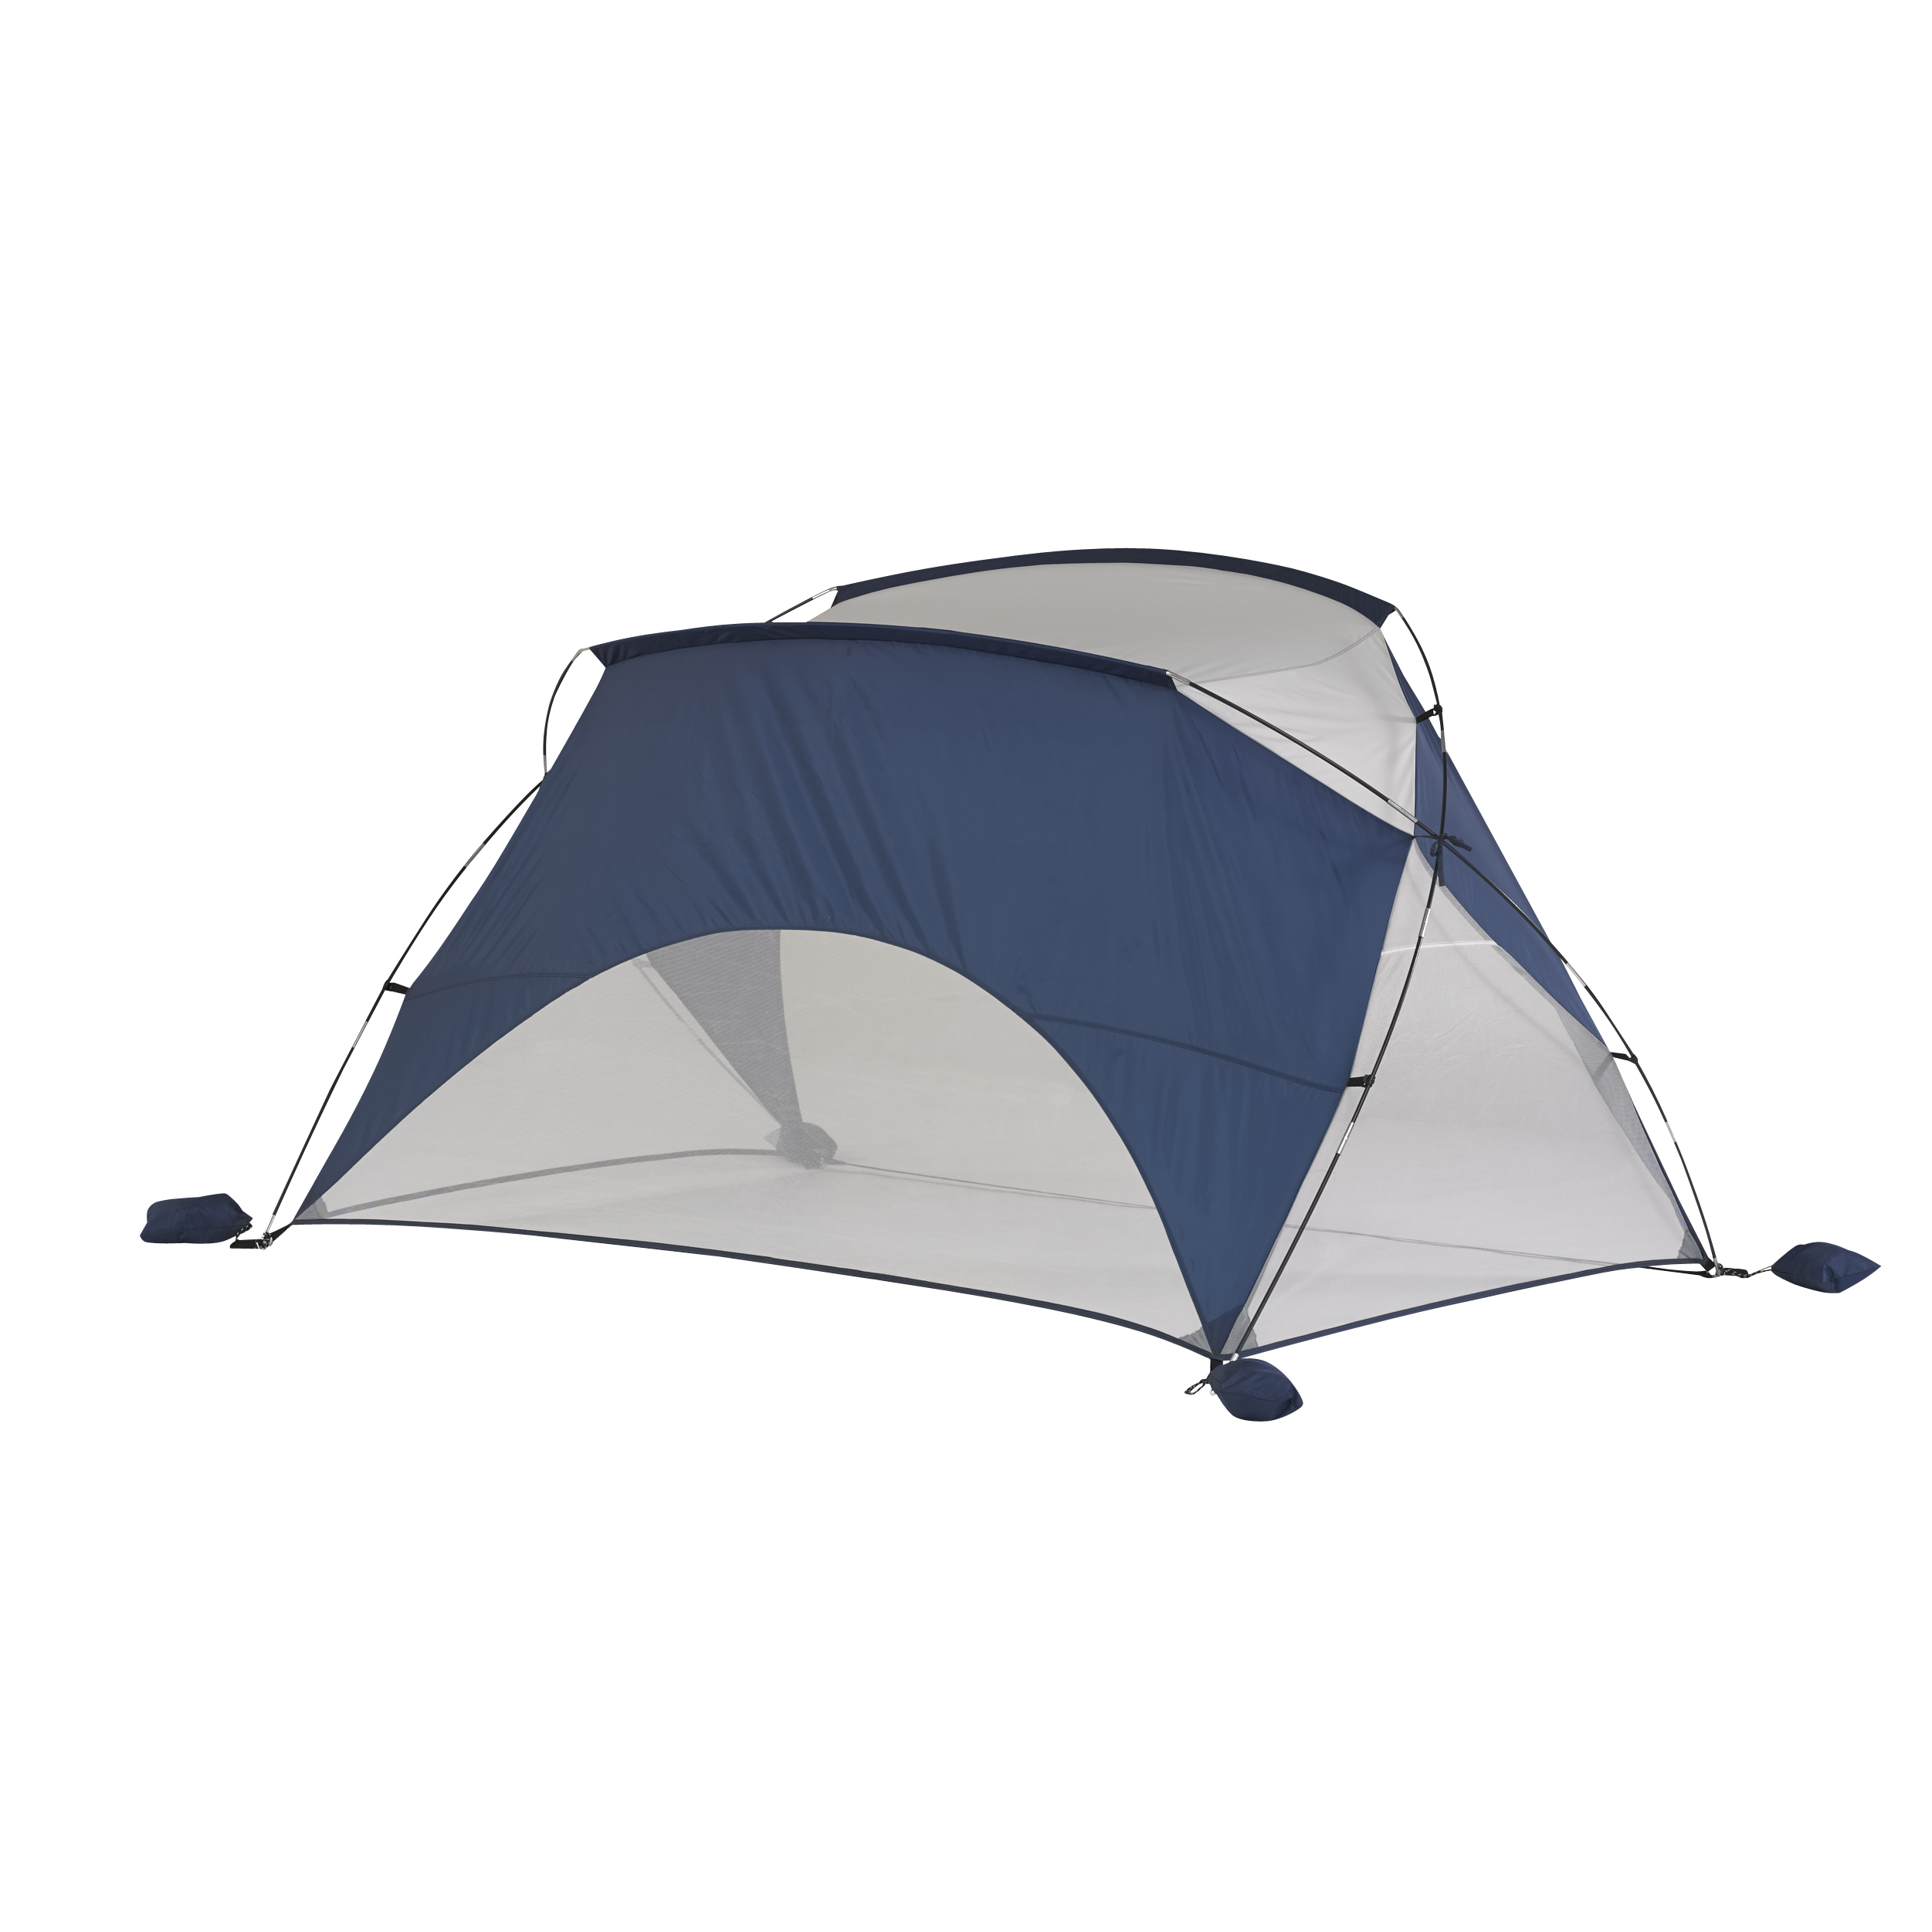 Ozark Trail 8 ft. x 6 ft. Portable Sun Shelter Beach Tent, with UV Protection - image 2 of 4